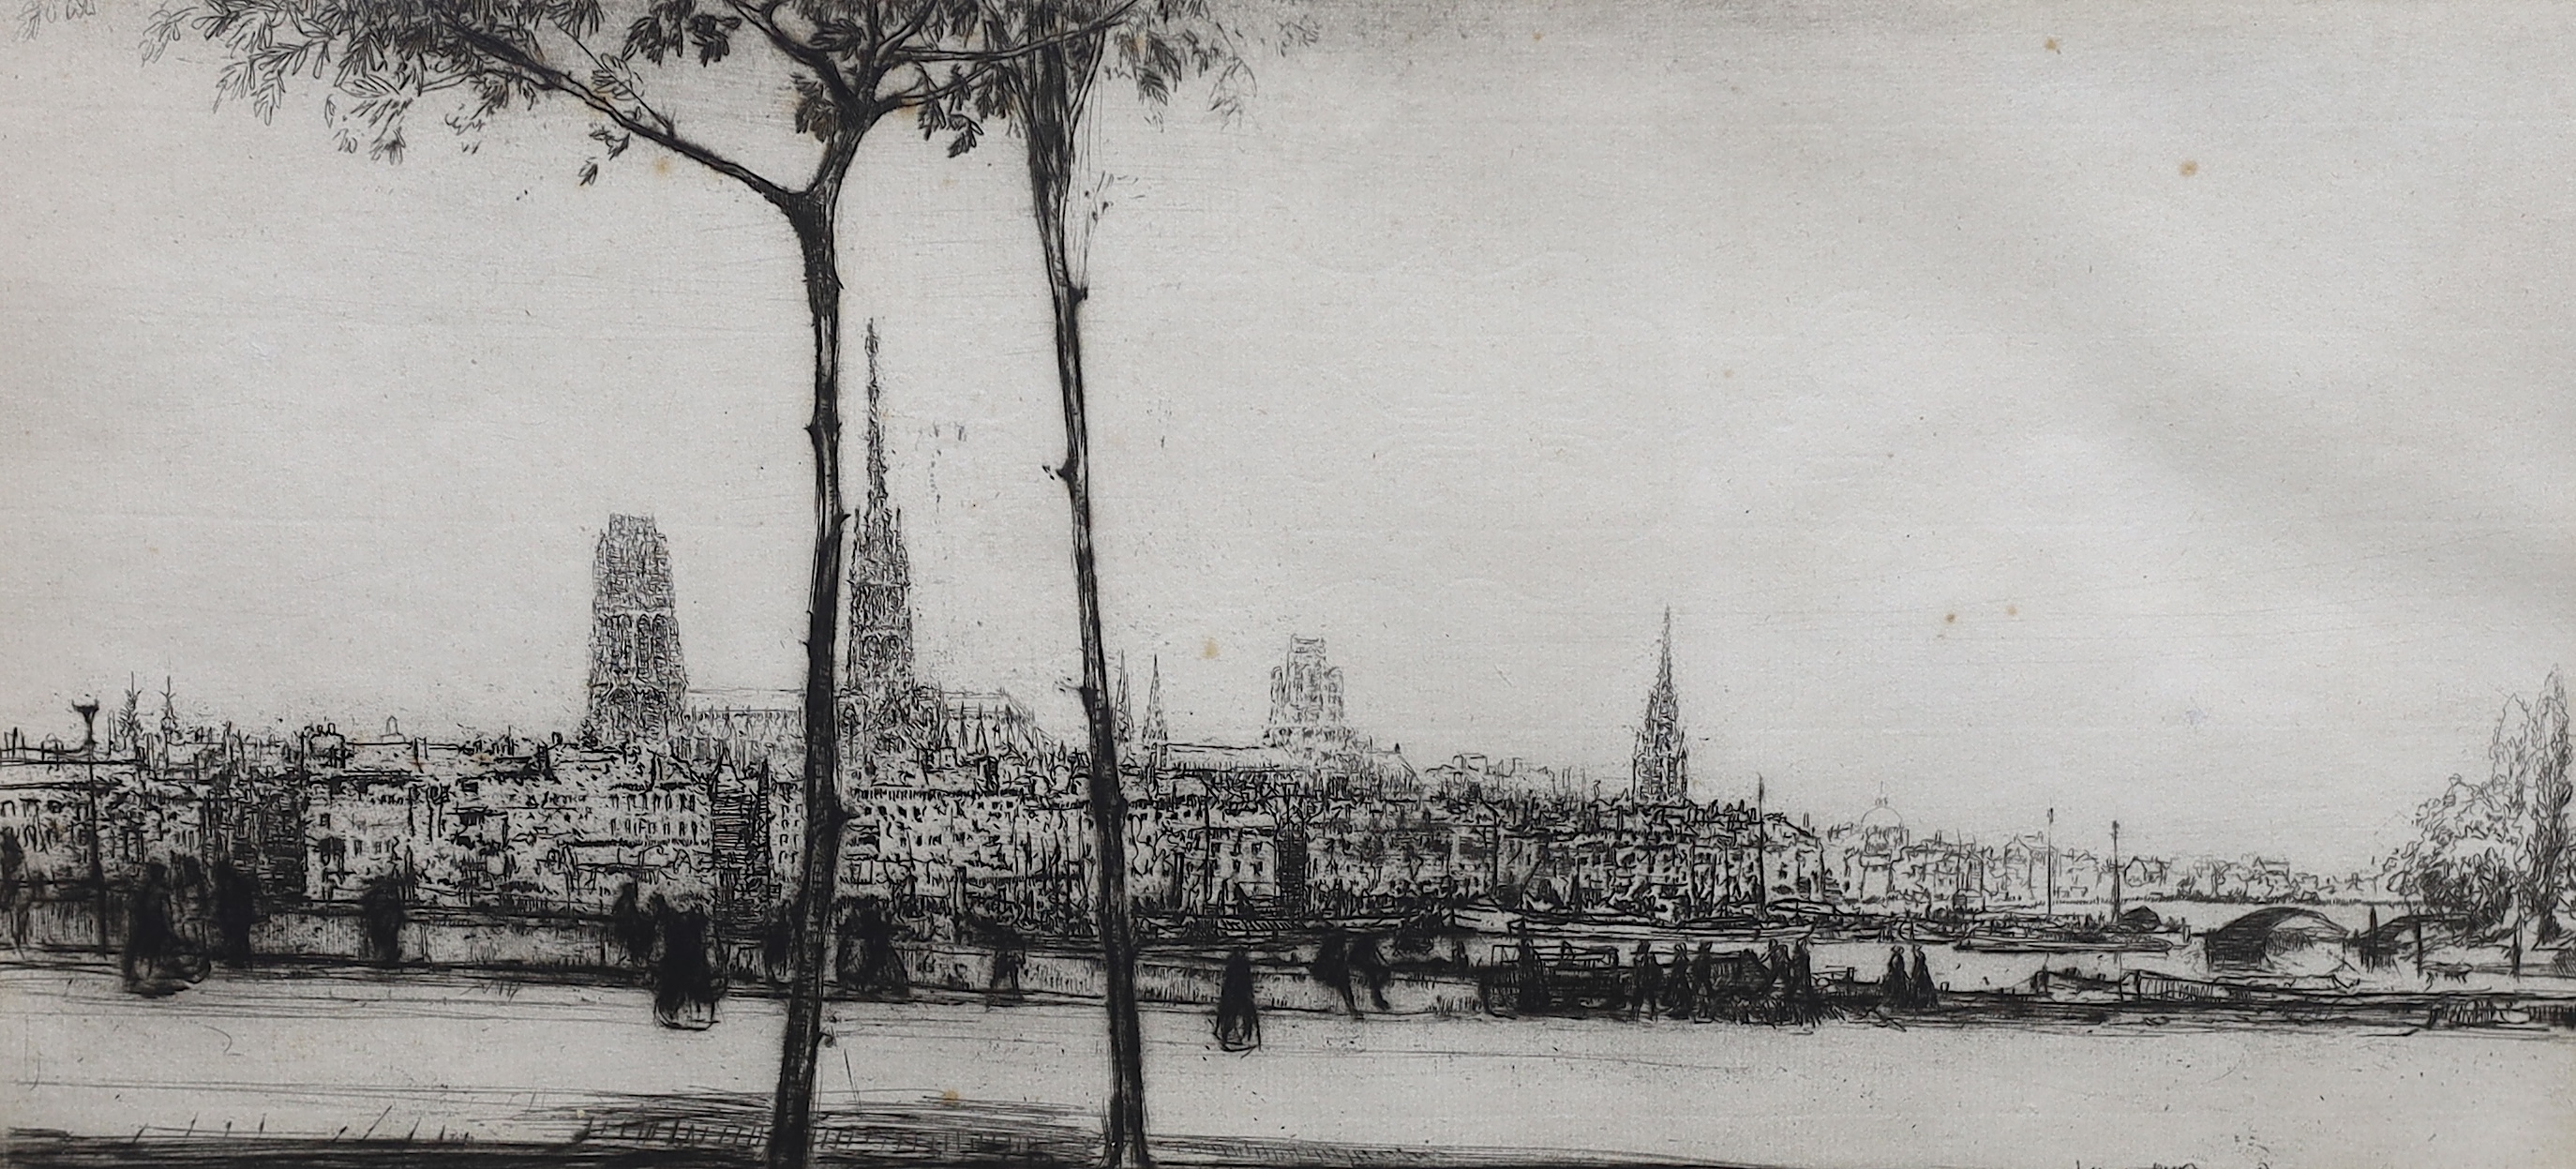 James McBey (Scottish, 1883-1959), drypoint etching, 'Rouen', signed in ink, dated in the plate 1916, 16.5 x 36.5cm. Condition - fair